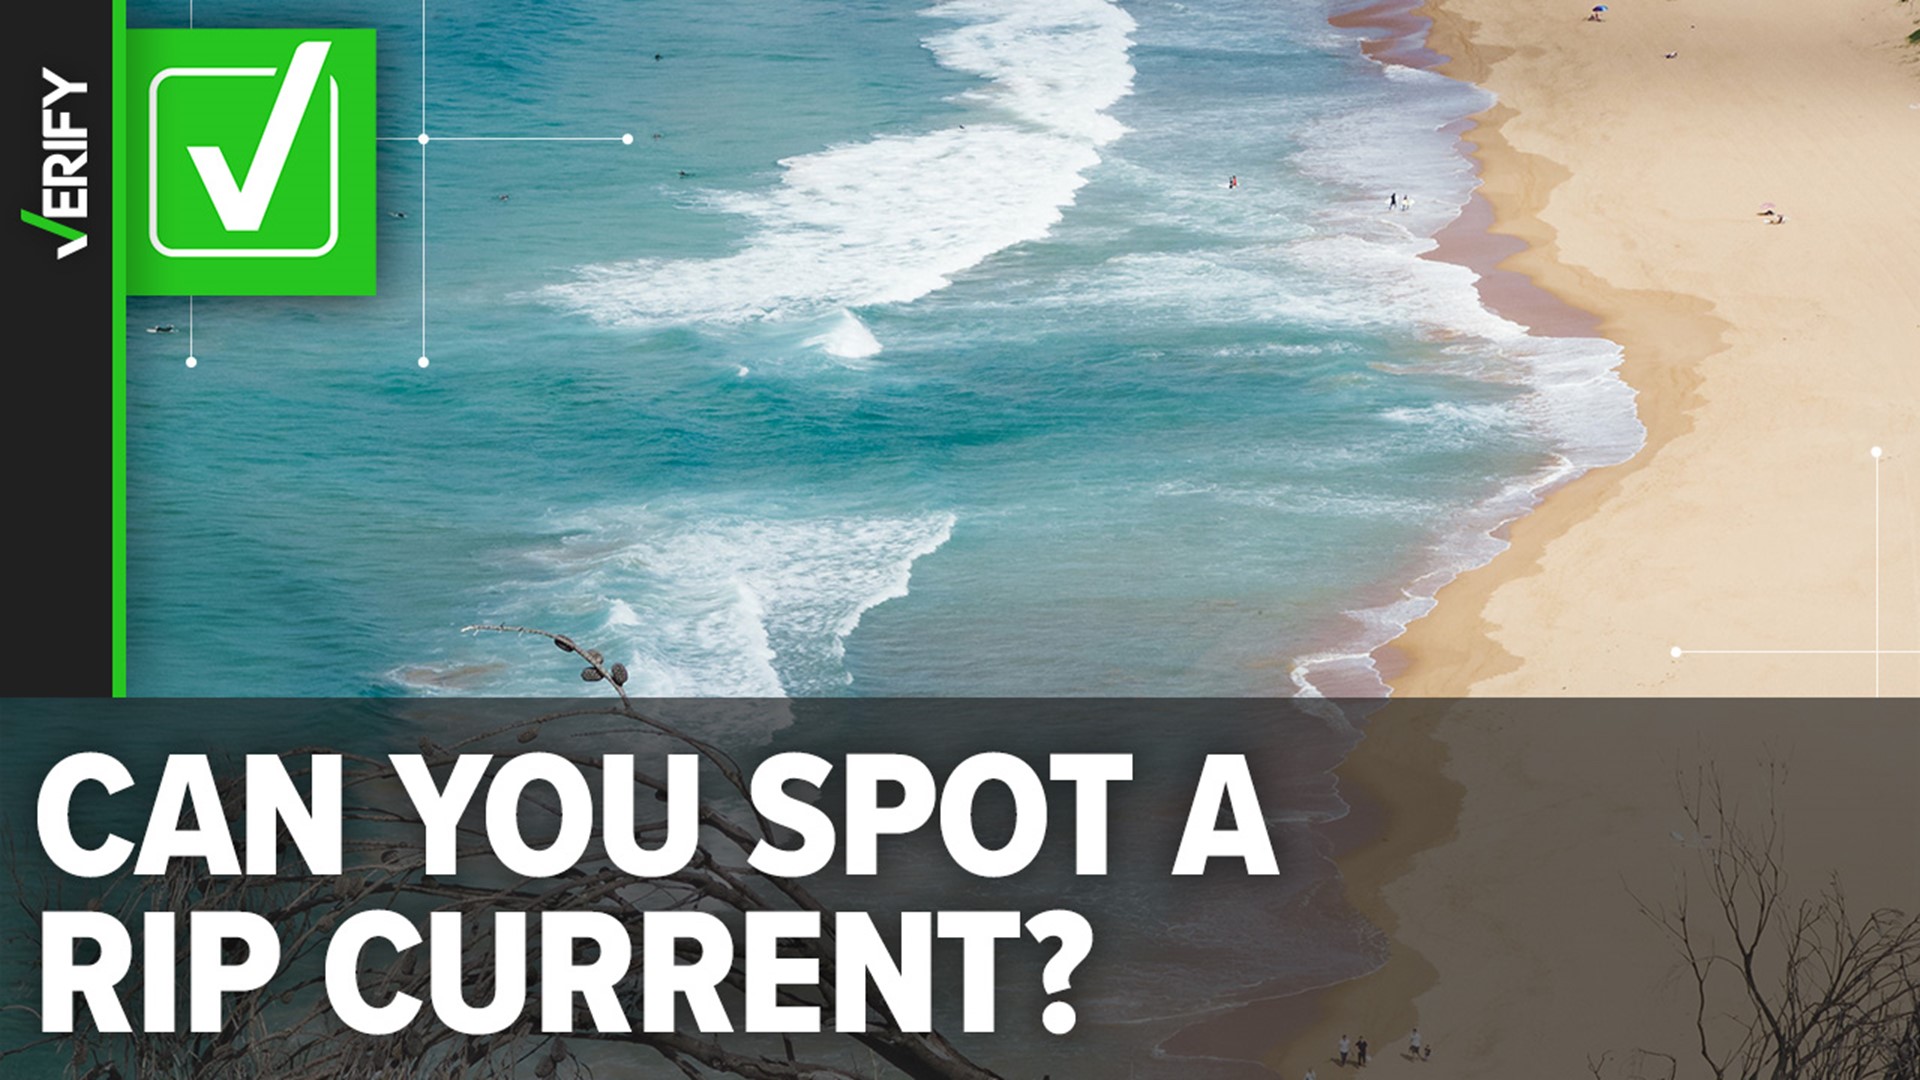 It’s extremely important to know what rip currents are and how to escape them before entering the water at the beach. Here are tips on how to spot them.